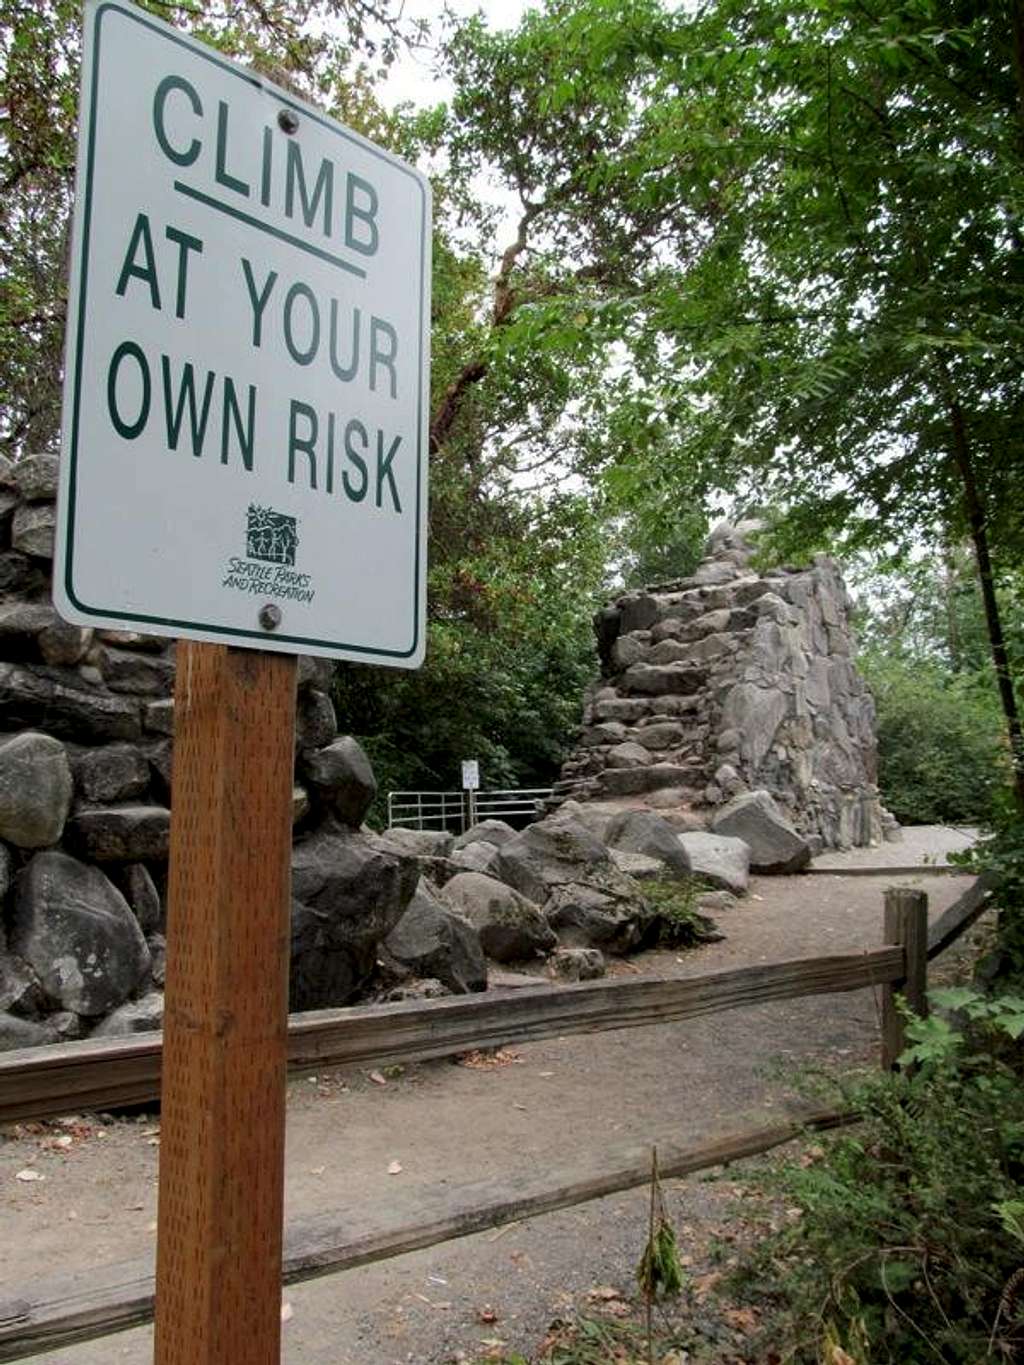 Climb at your own risk